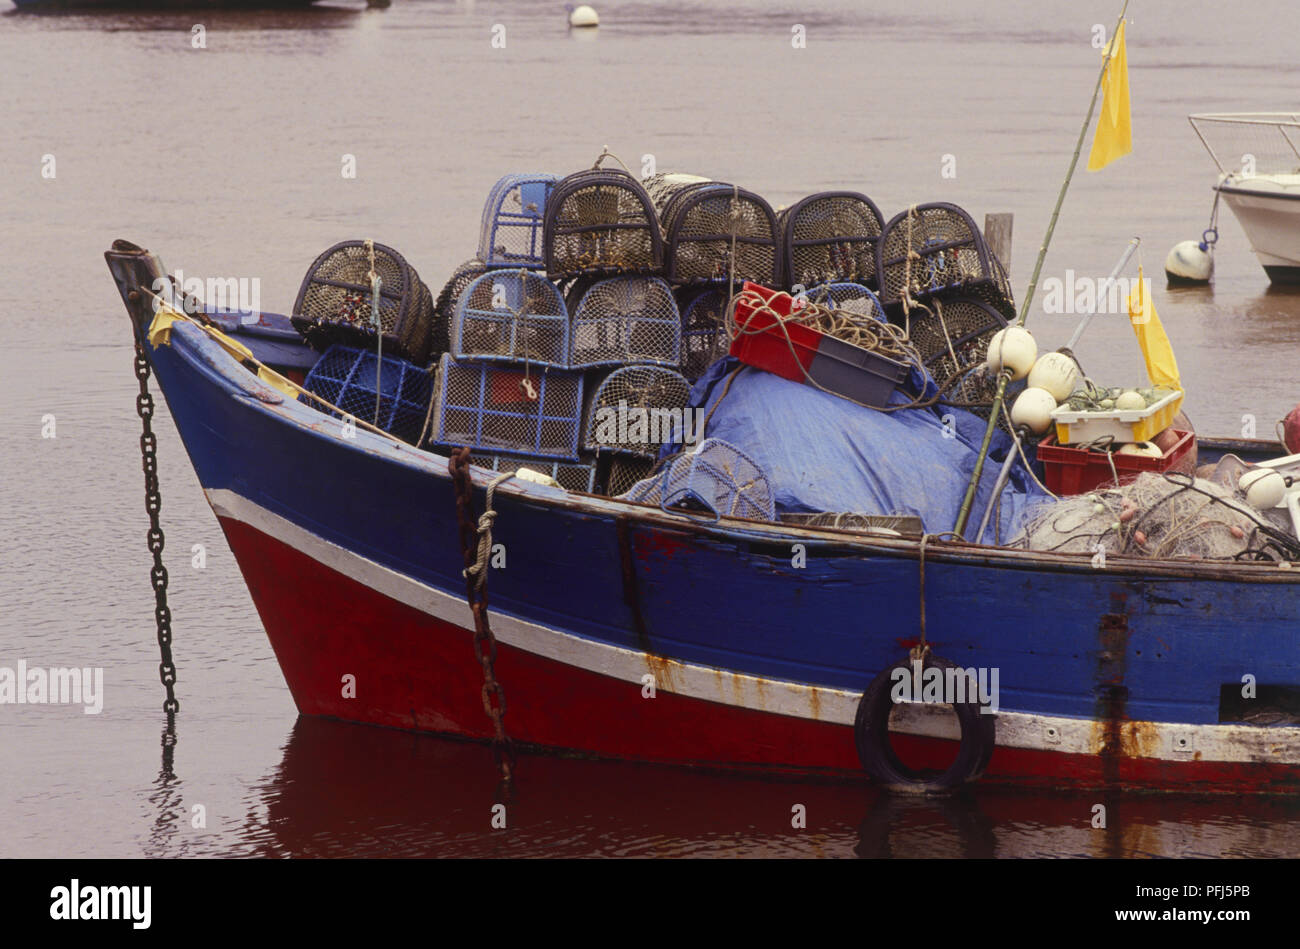 France, Brittany, Le Pouldou harbour, boat loaded with fishing tackle and lobster cages Stock Photo